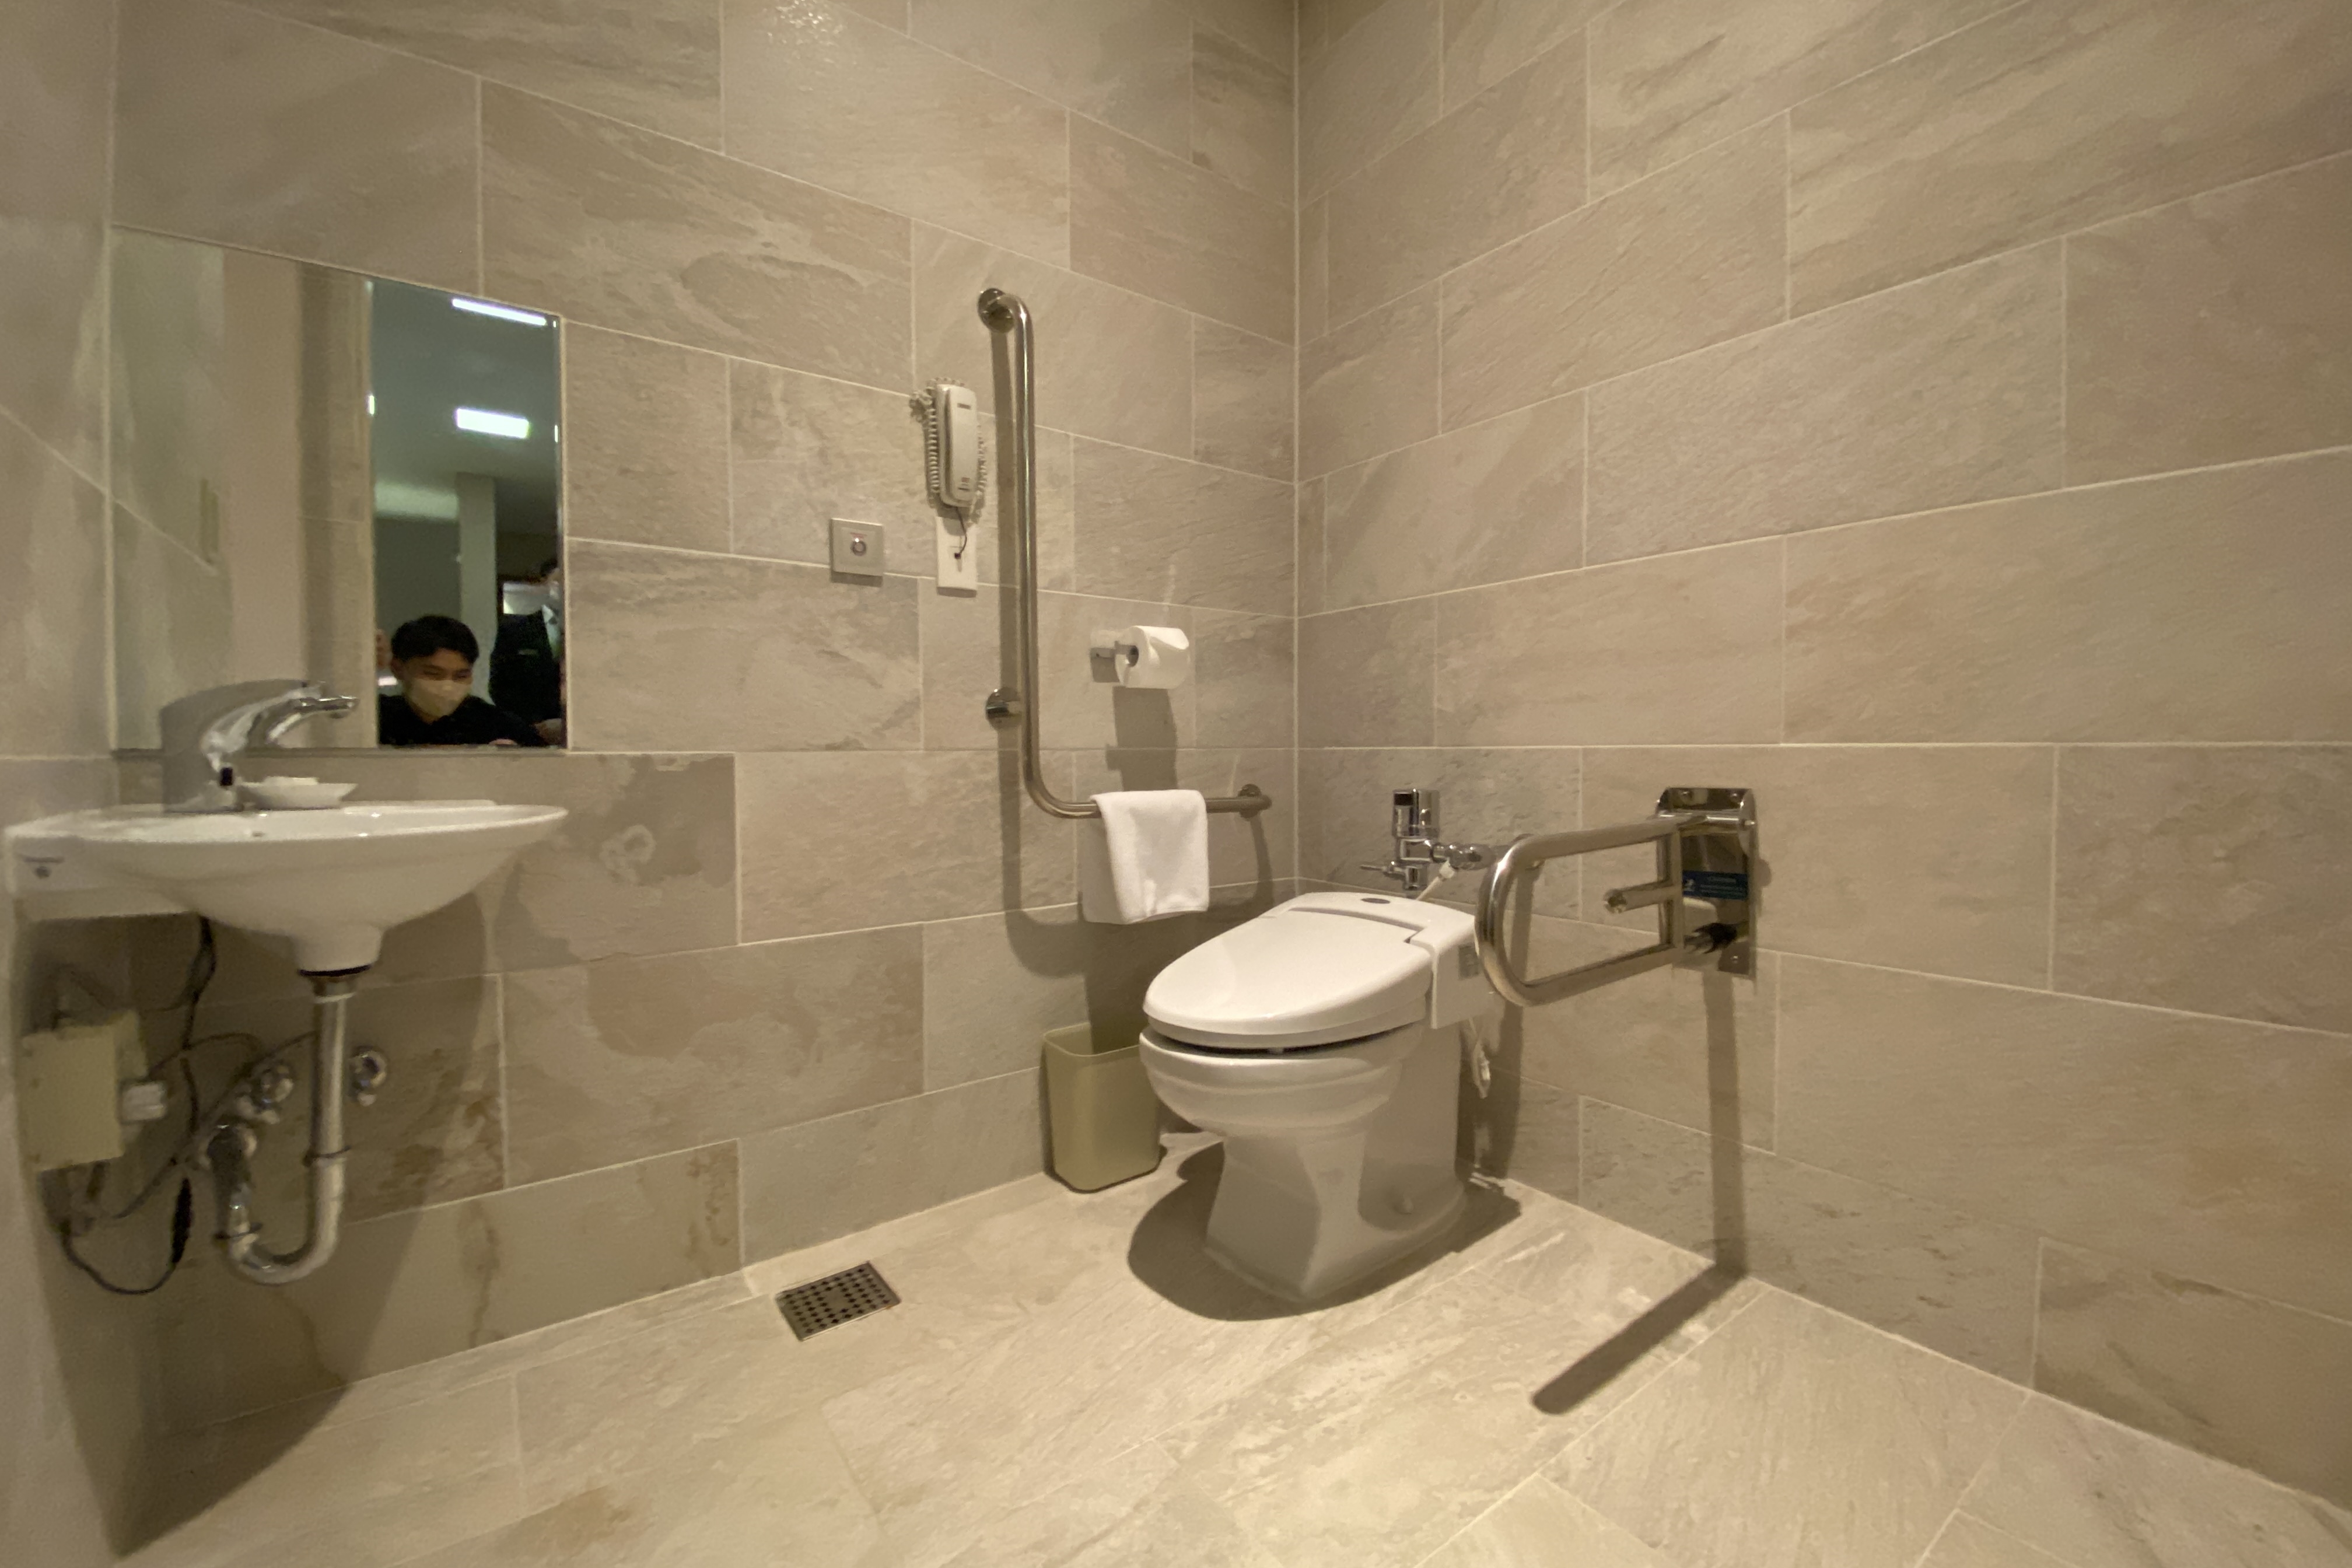 Premier Suite guest room0 : Interior view of Mayfield Hotel bathroom that is spacious and handles installed. 